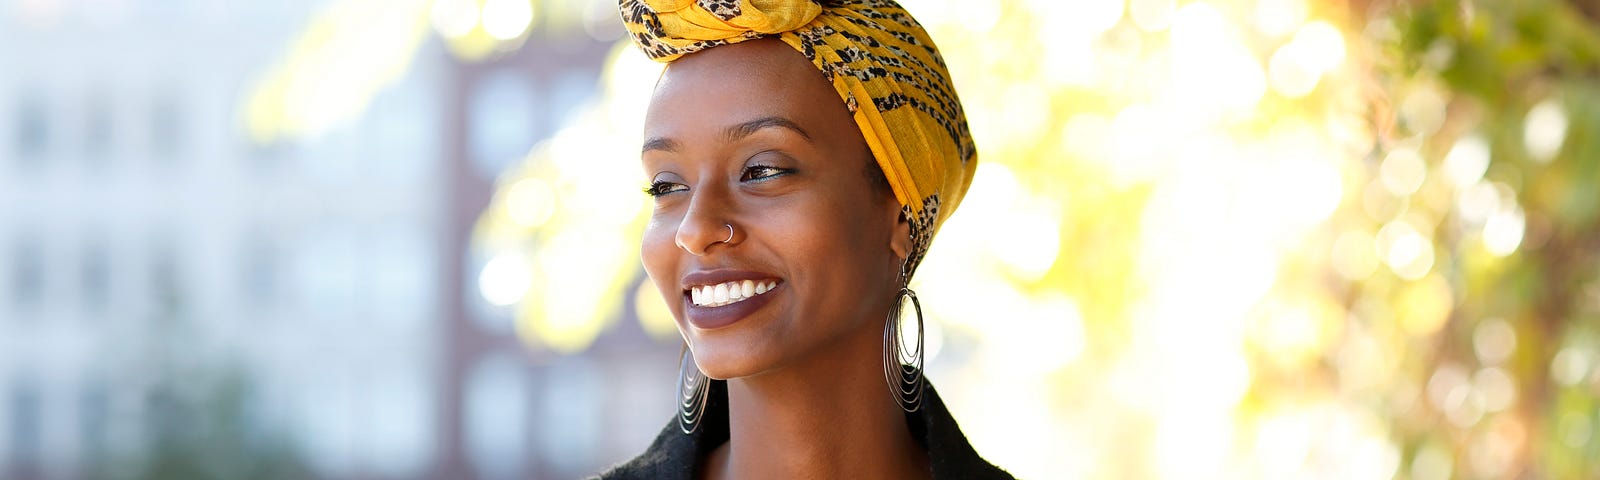 A portrait of a black woman outside in the sunlight, smiling